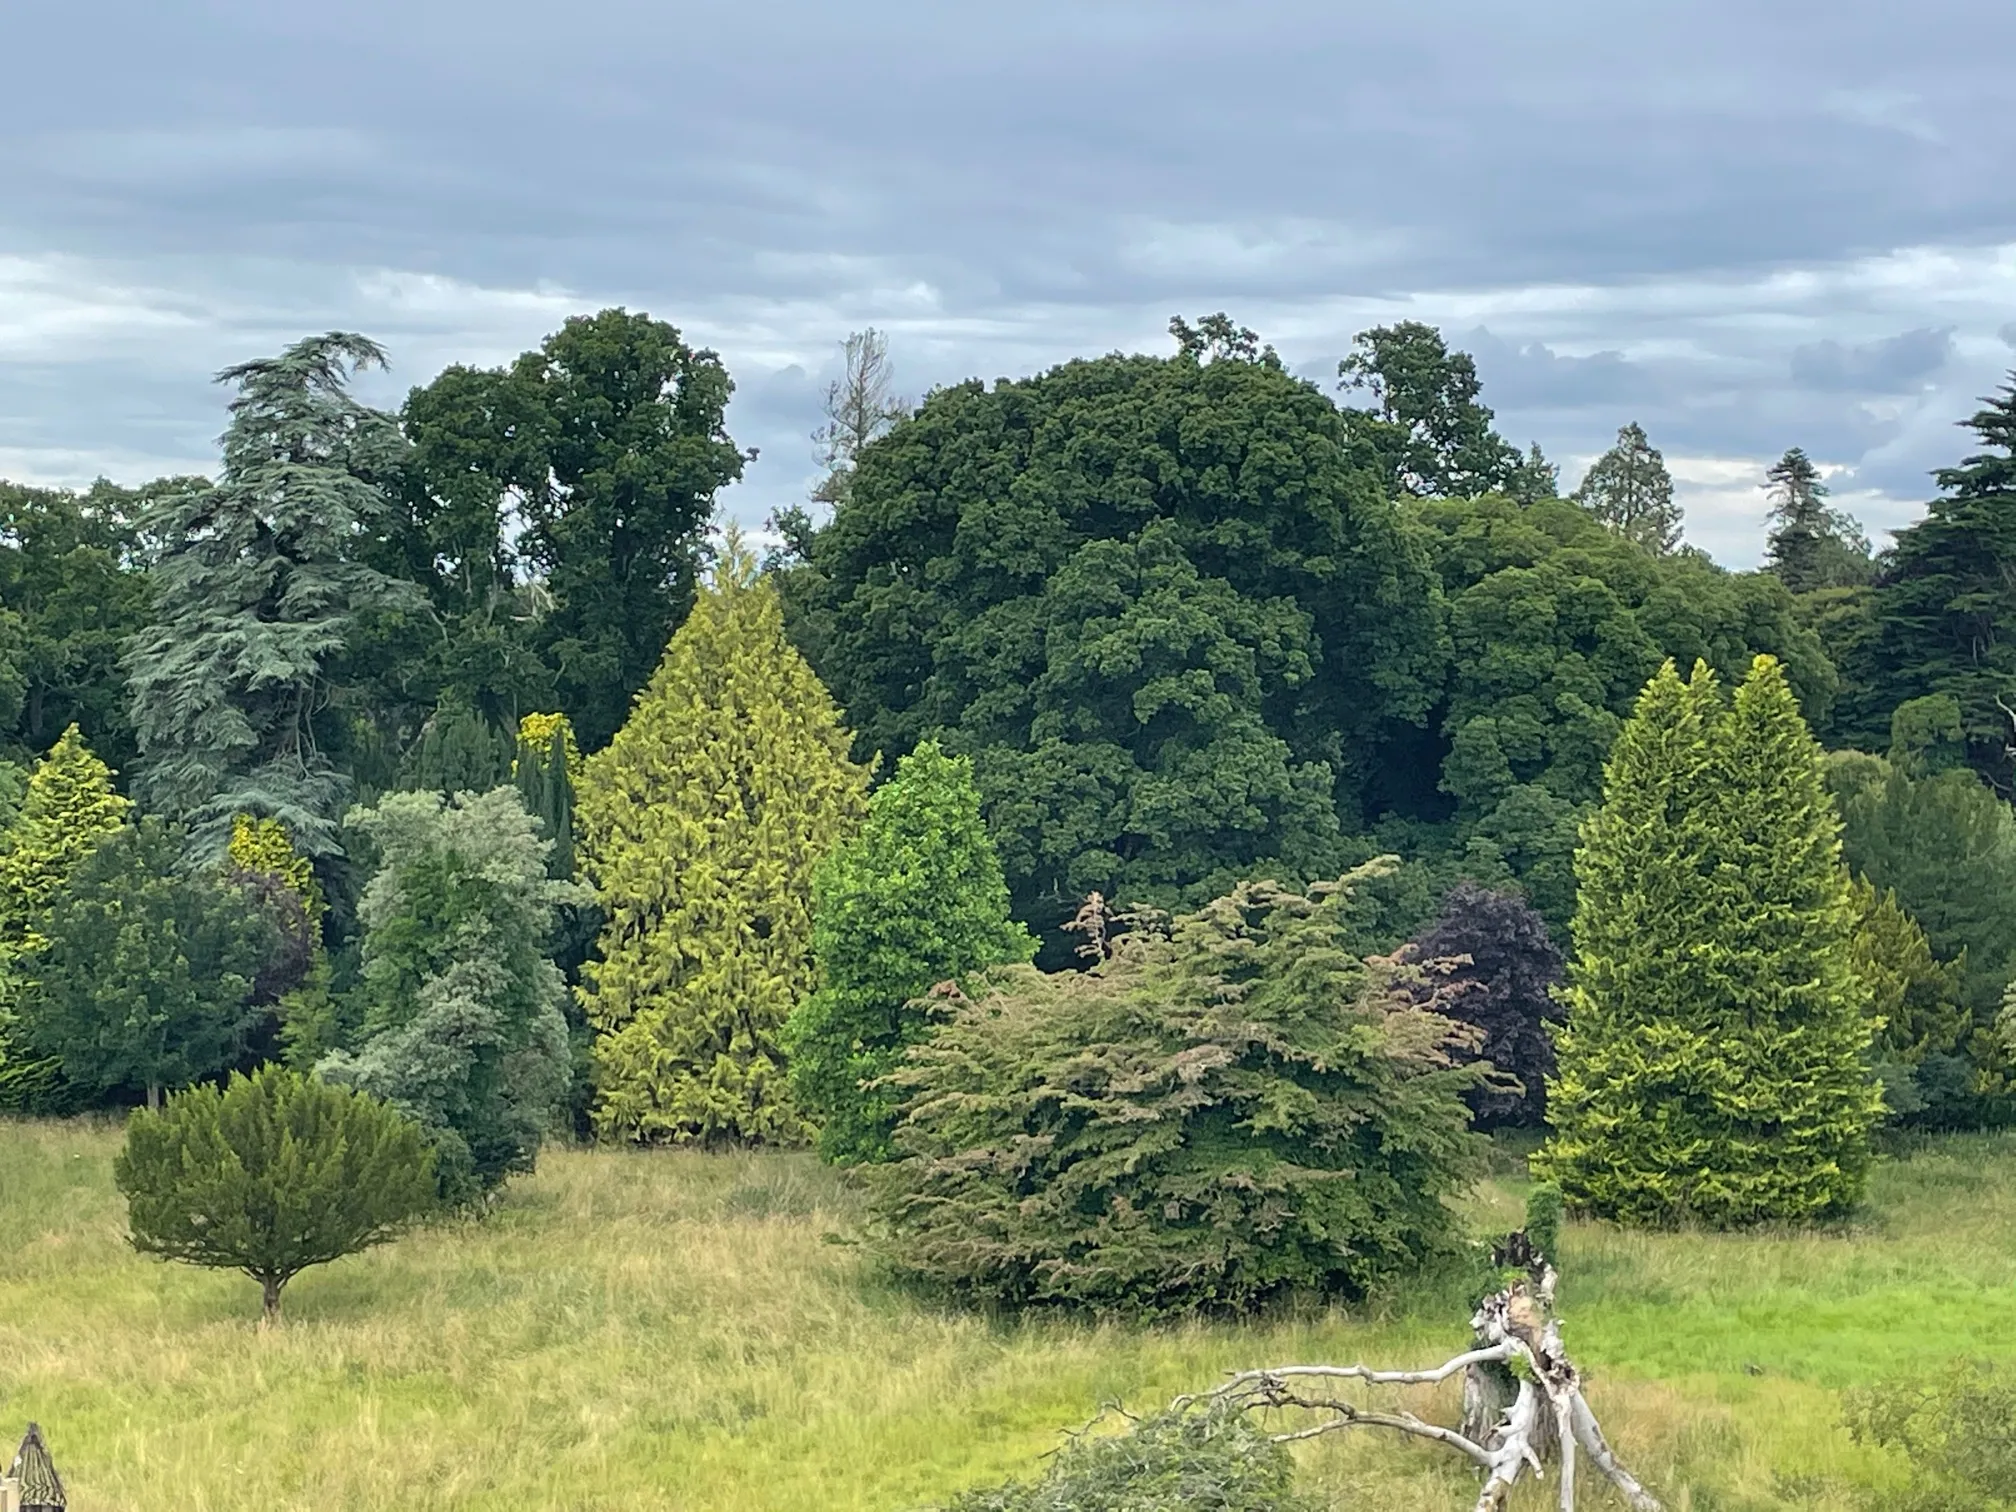 Photo showing: This captures a broad mix of trees near Dunsany Castle, in the inner part of the Dunsany demesne, in what is since 2014 Ireland's largest private nature reserve, the subject of a major rewilding project.